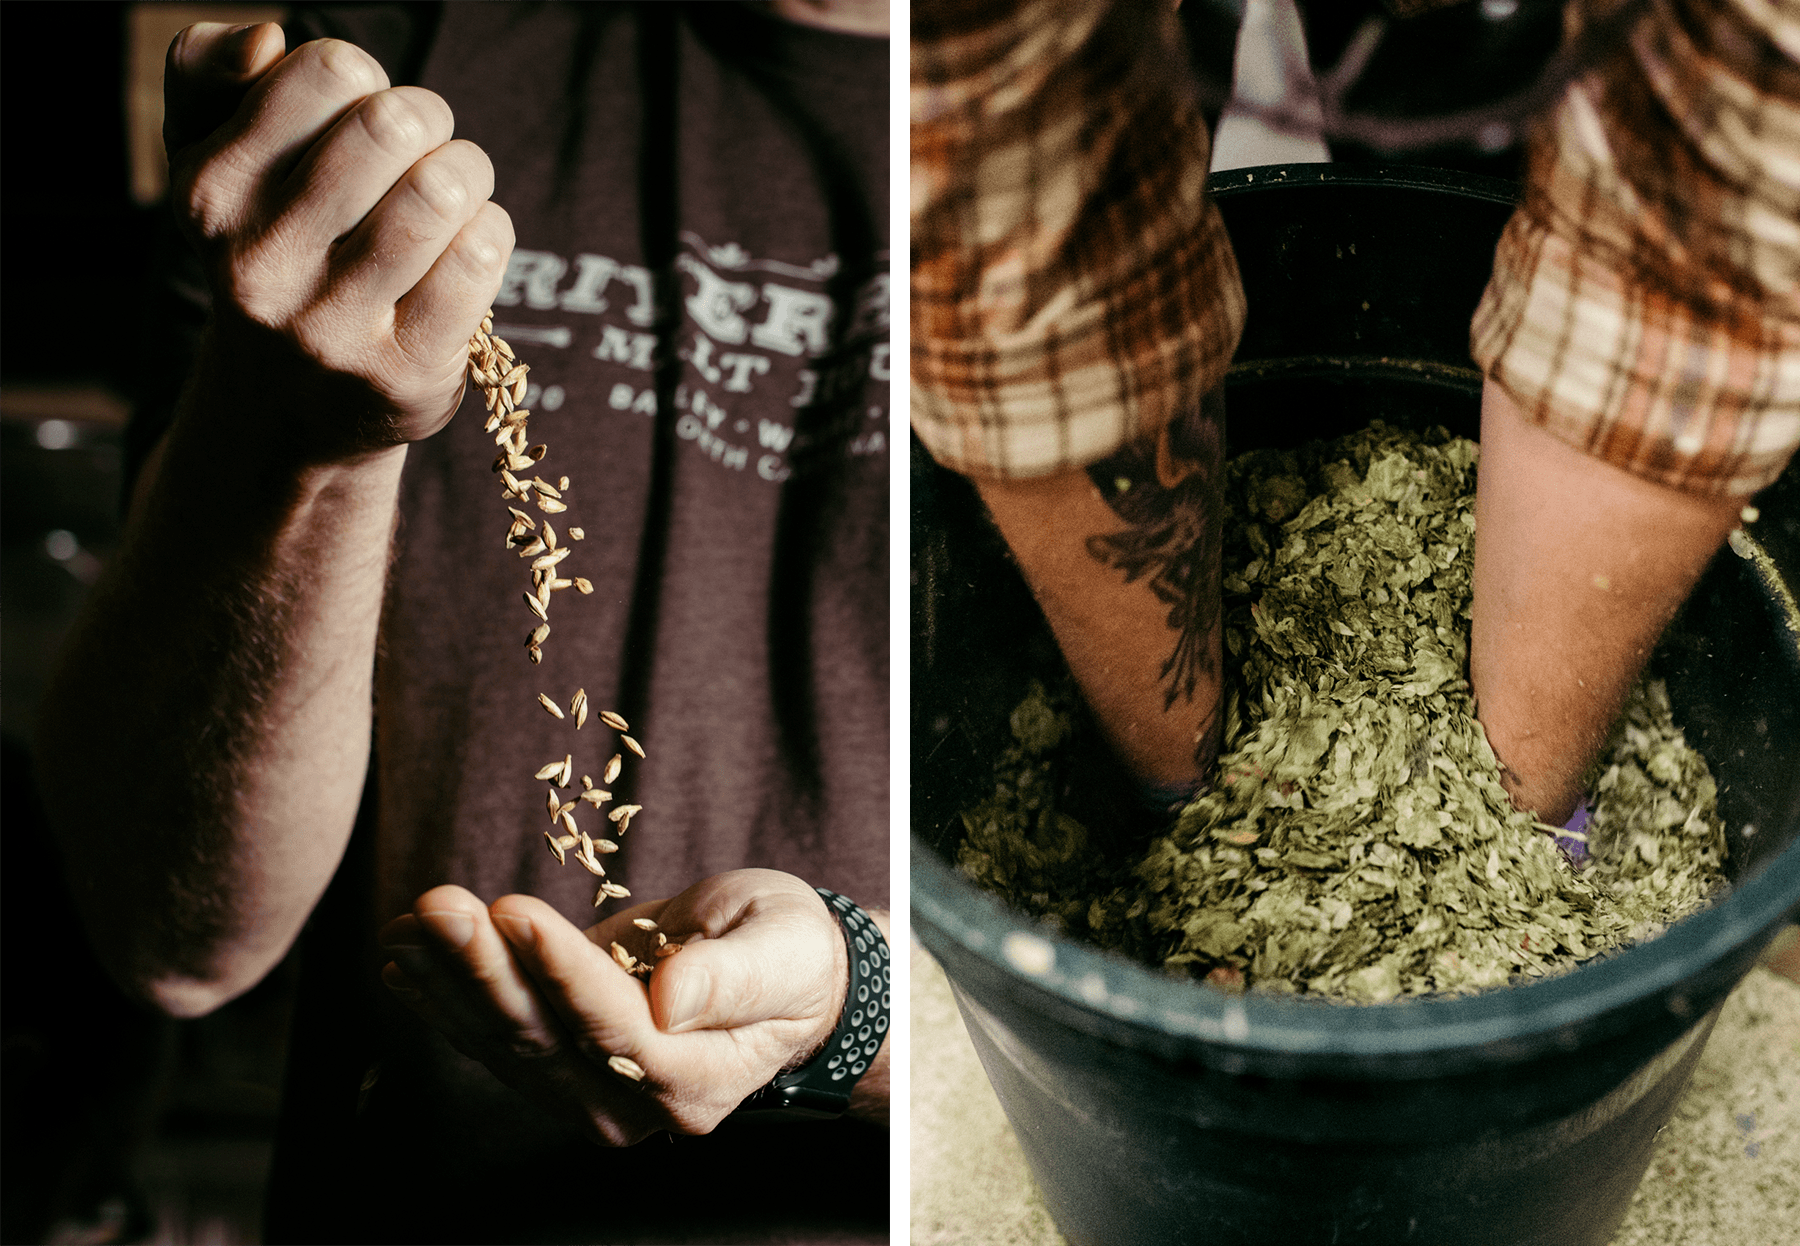 Hands holding malted oats next to hands reaching into a bin of hops.